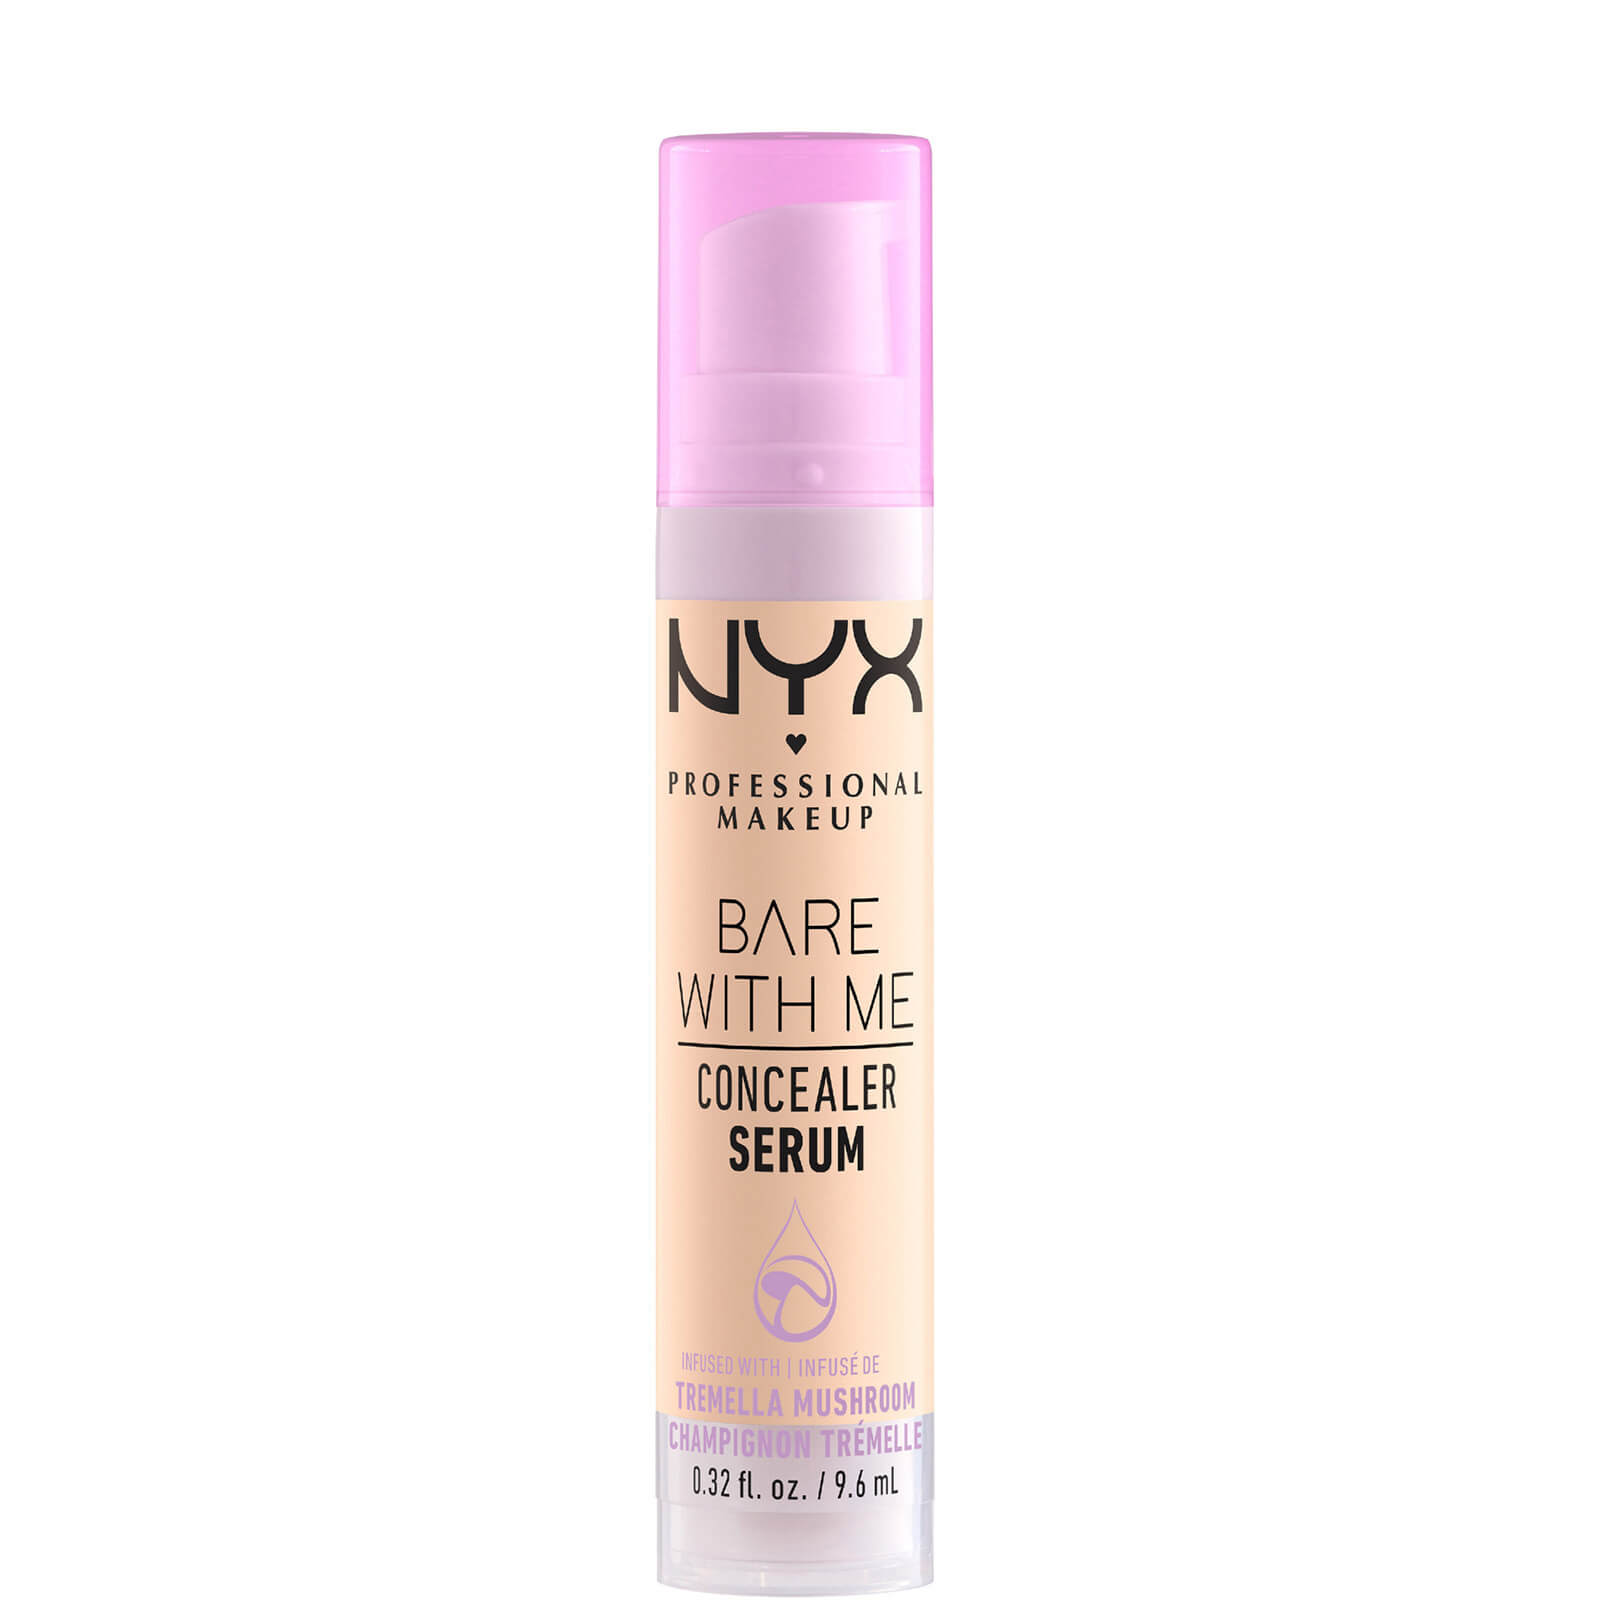 Image of NYX Professional Makeup Bare With Me Concealer Serum 9.6ml (Various Shades) - Fair